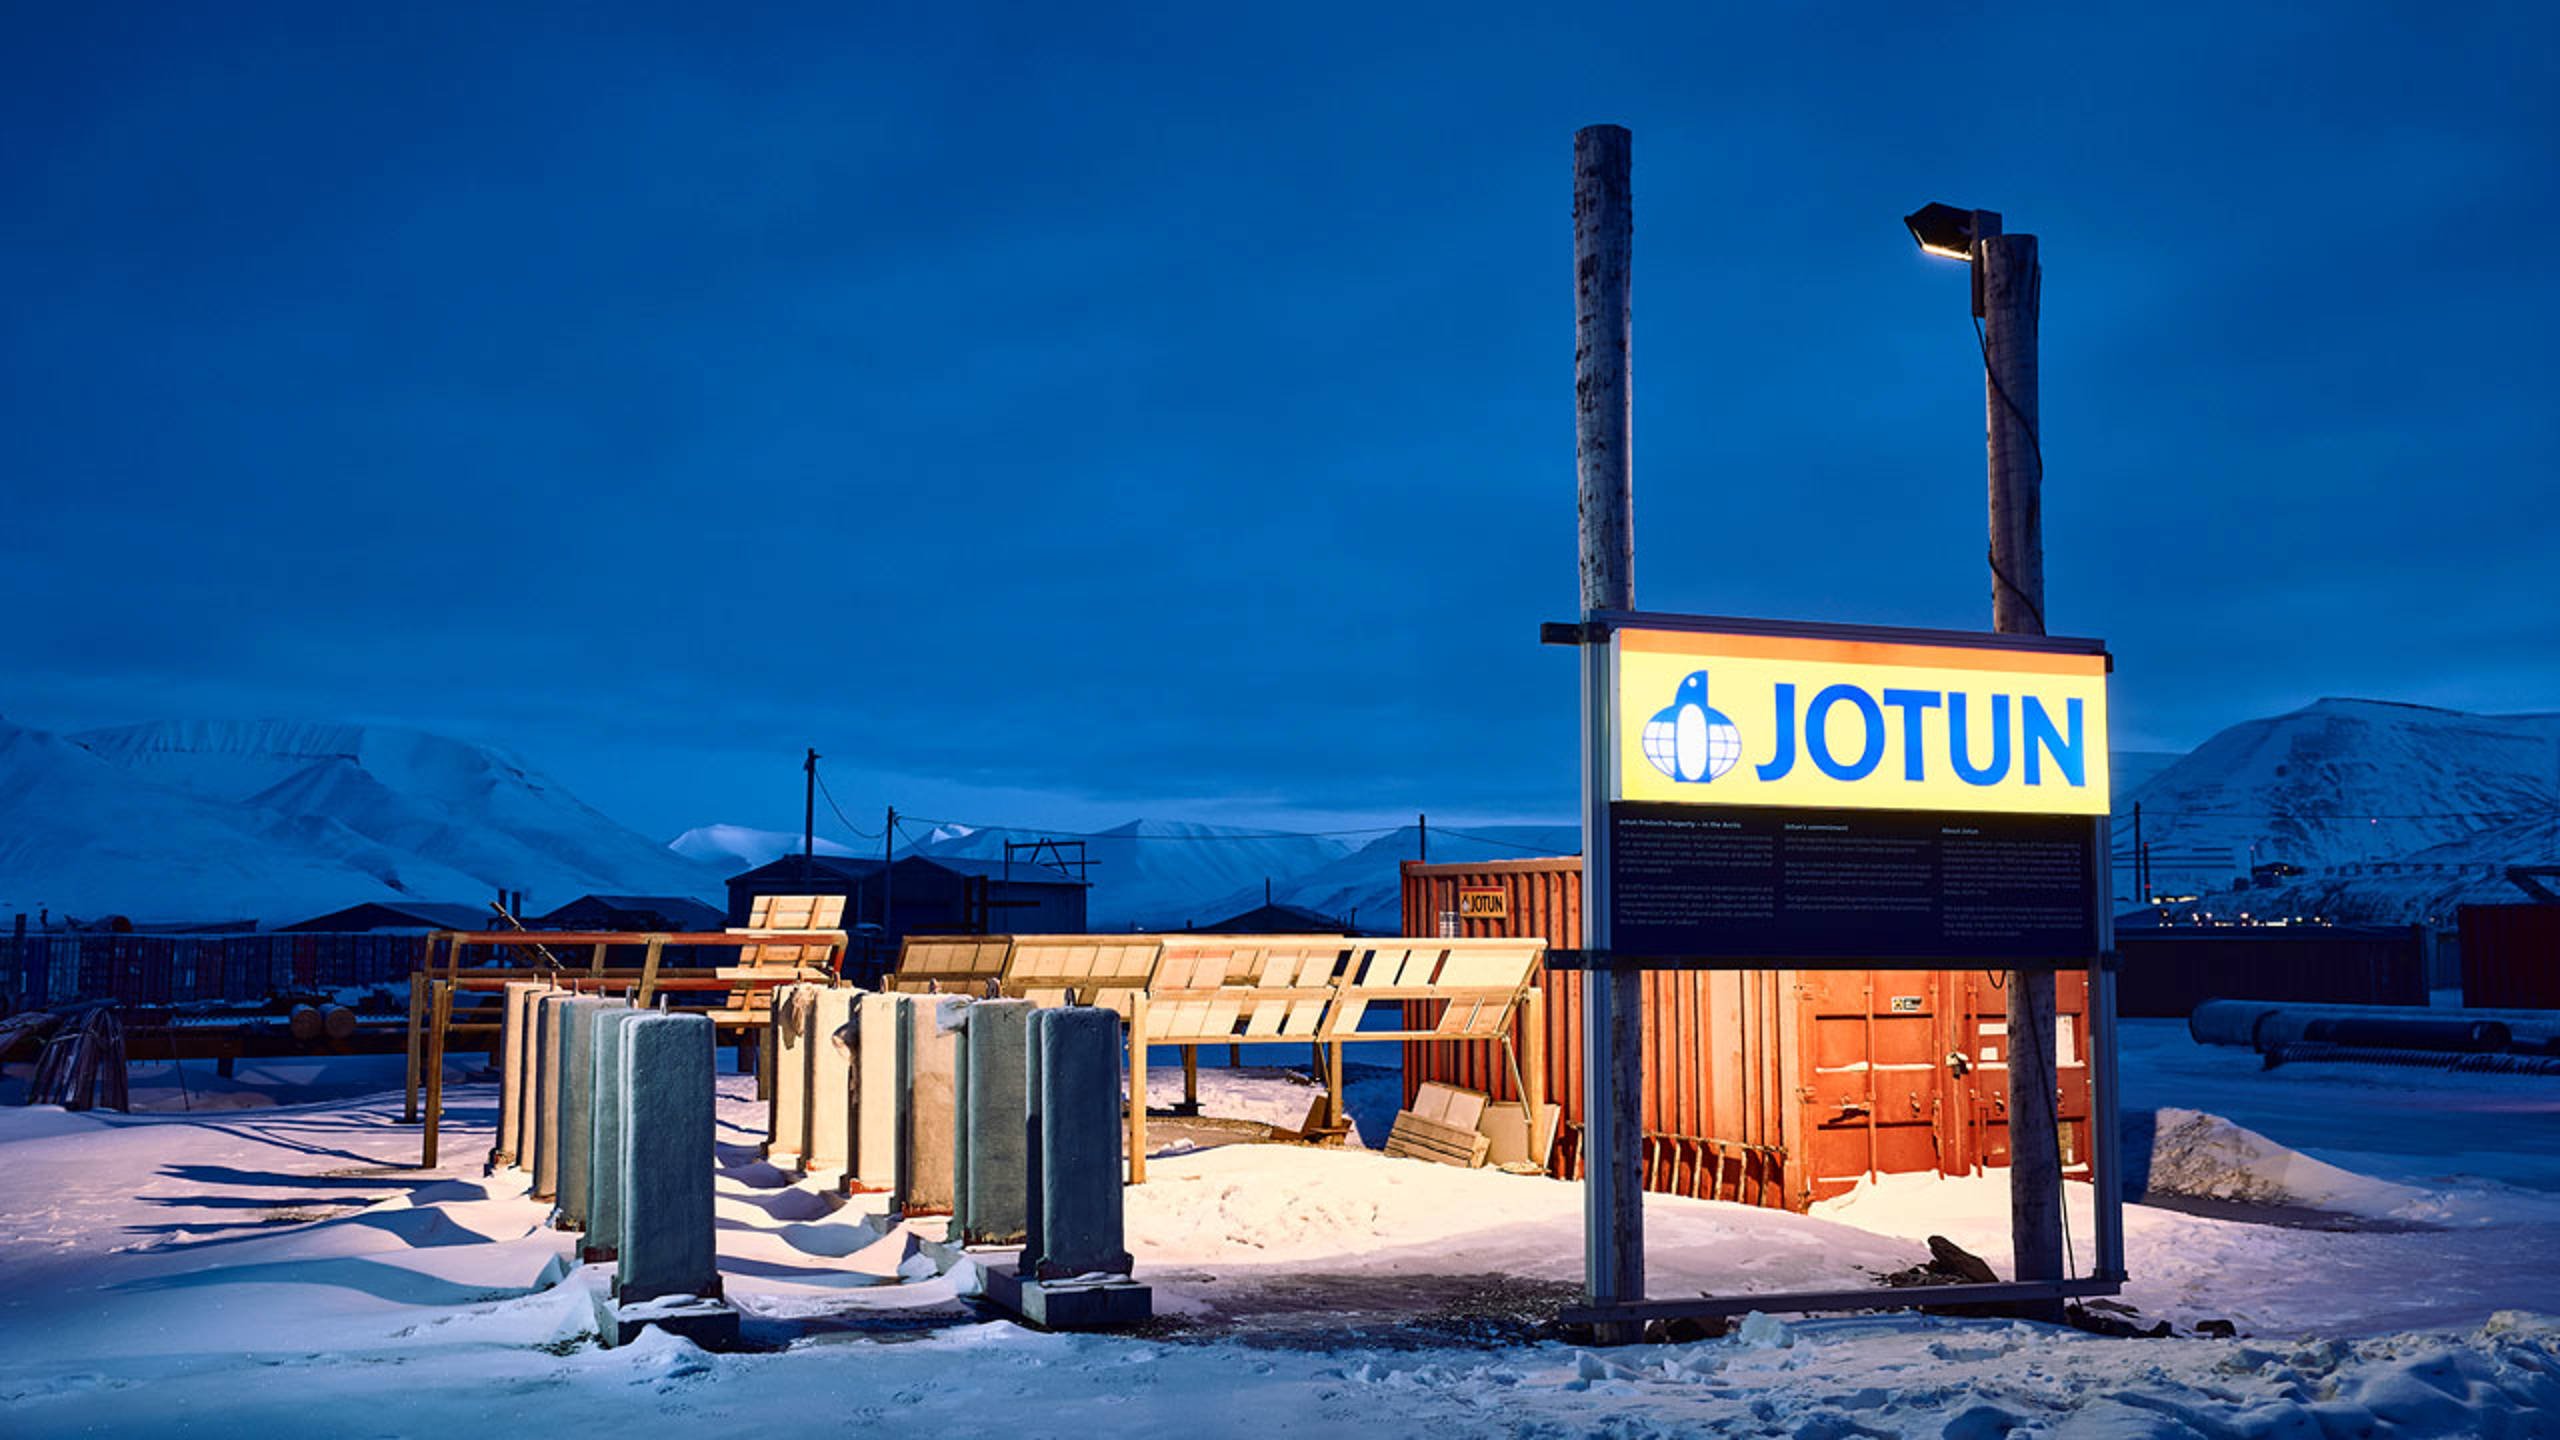 Jotun performs rigorous testing of all paints and coatings in every thinkable weather conditions. Here from the company's test site in Svalbard during winter.